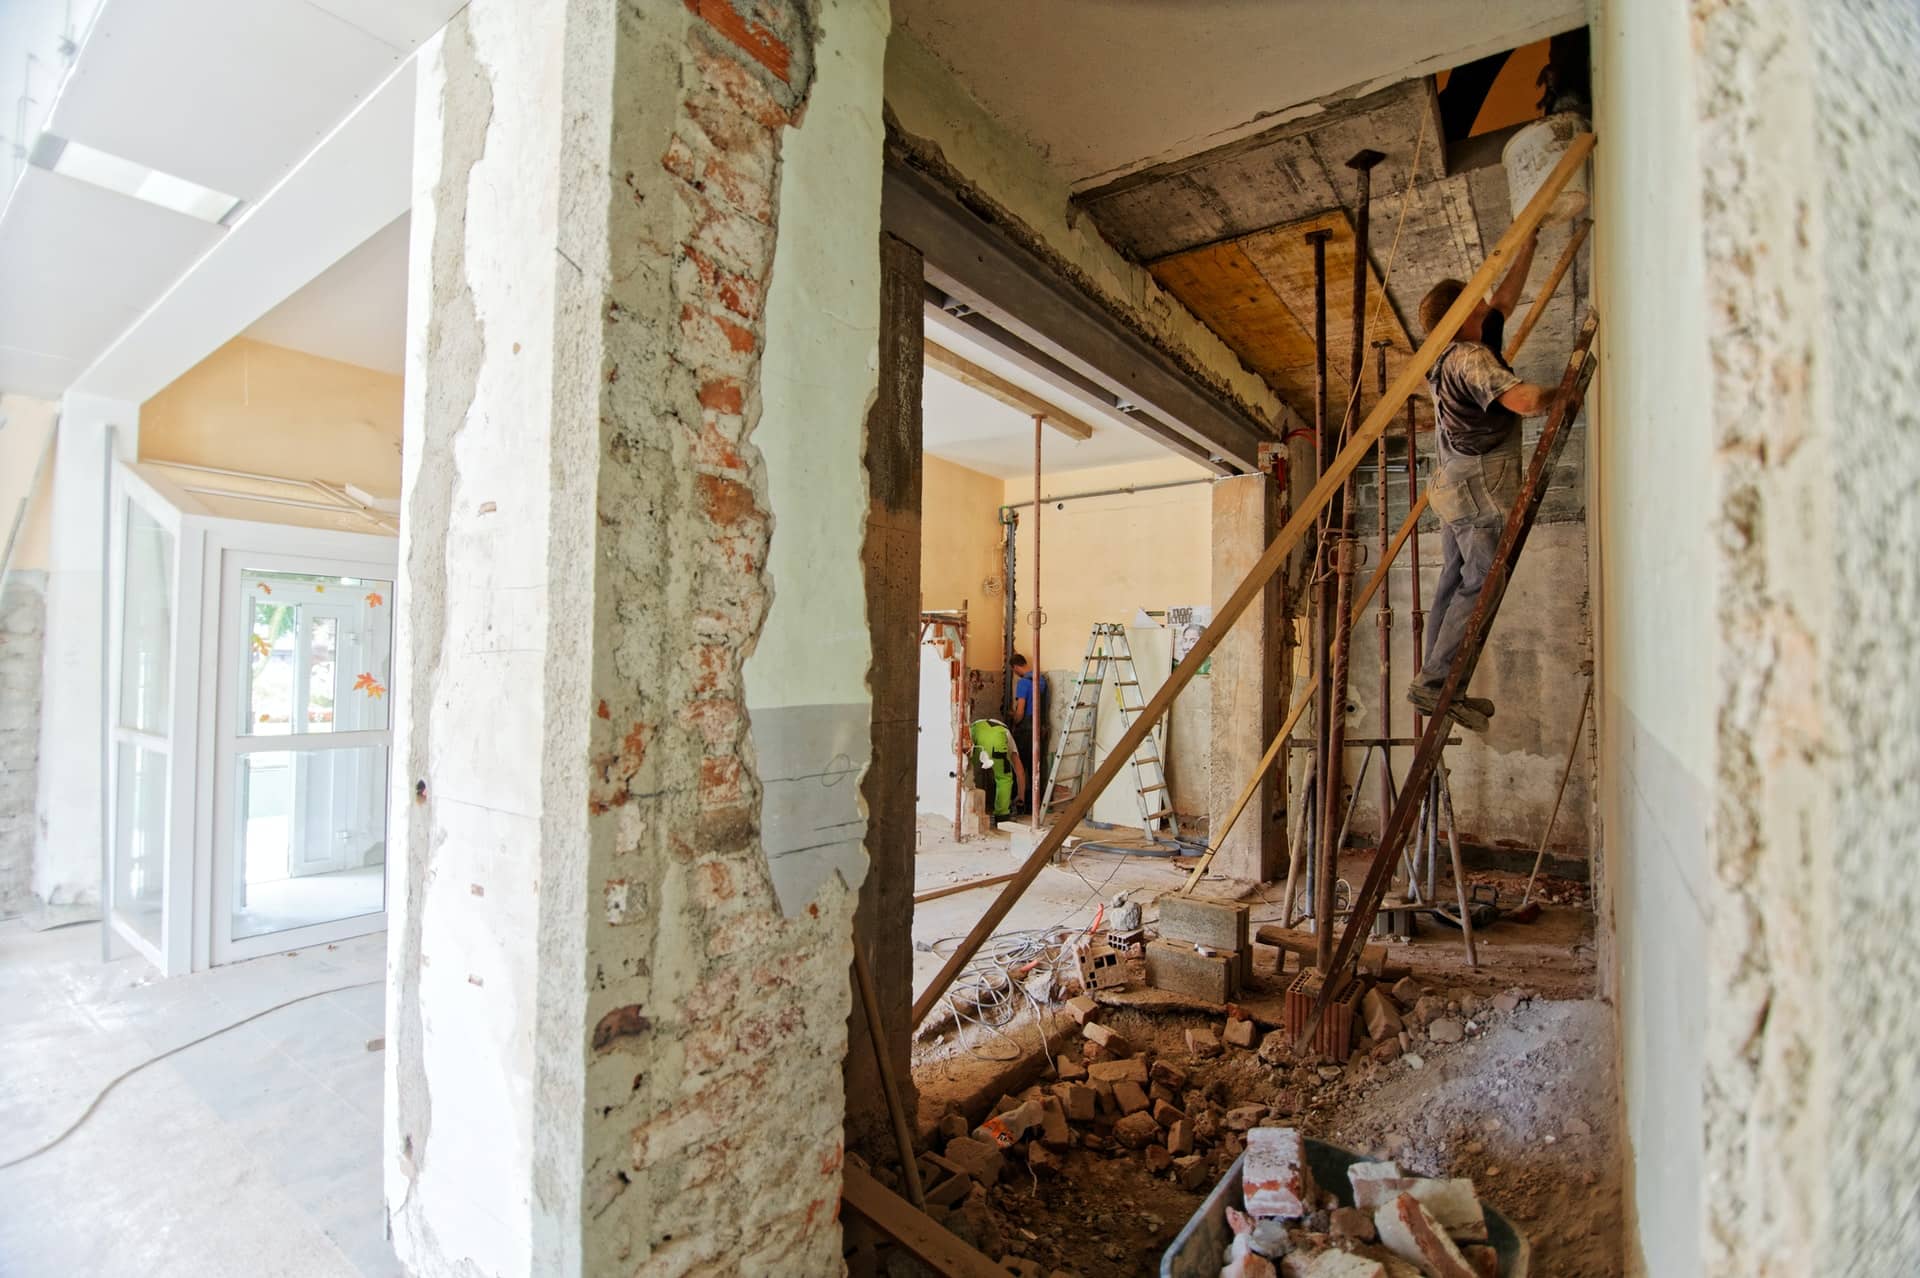 6 Safety Considerations During A Home Renovation